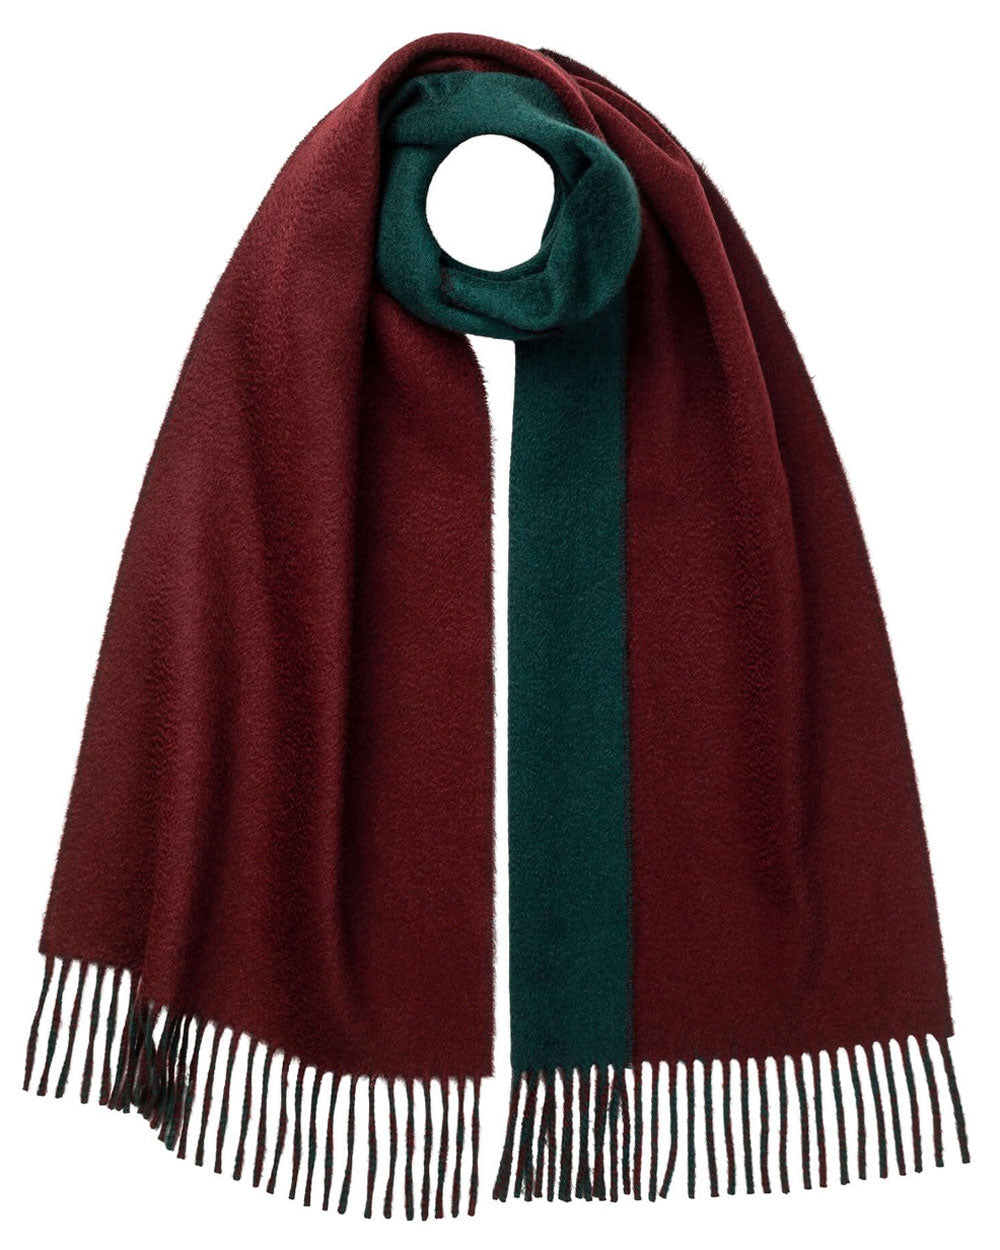 Cashmere Contrast Scarf in Maroon and Green